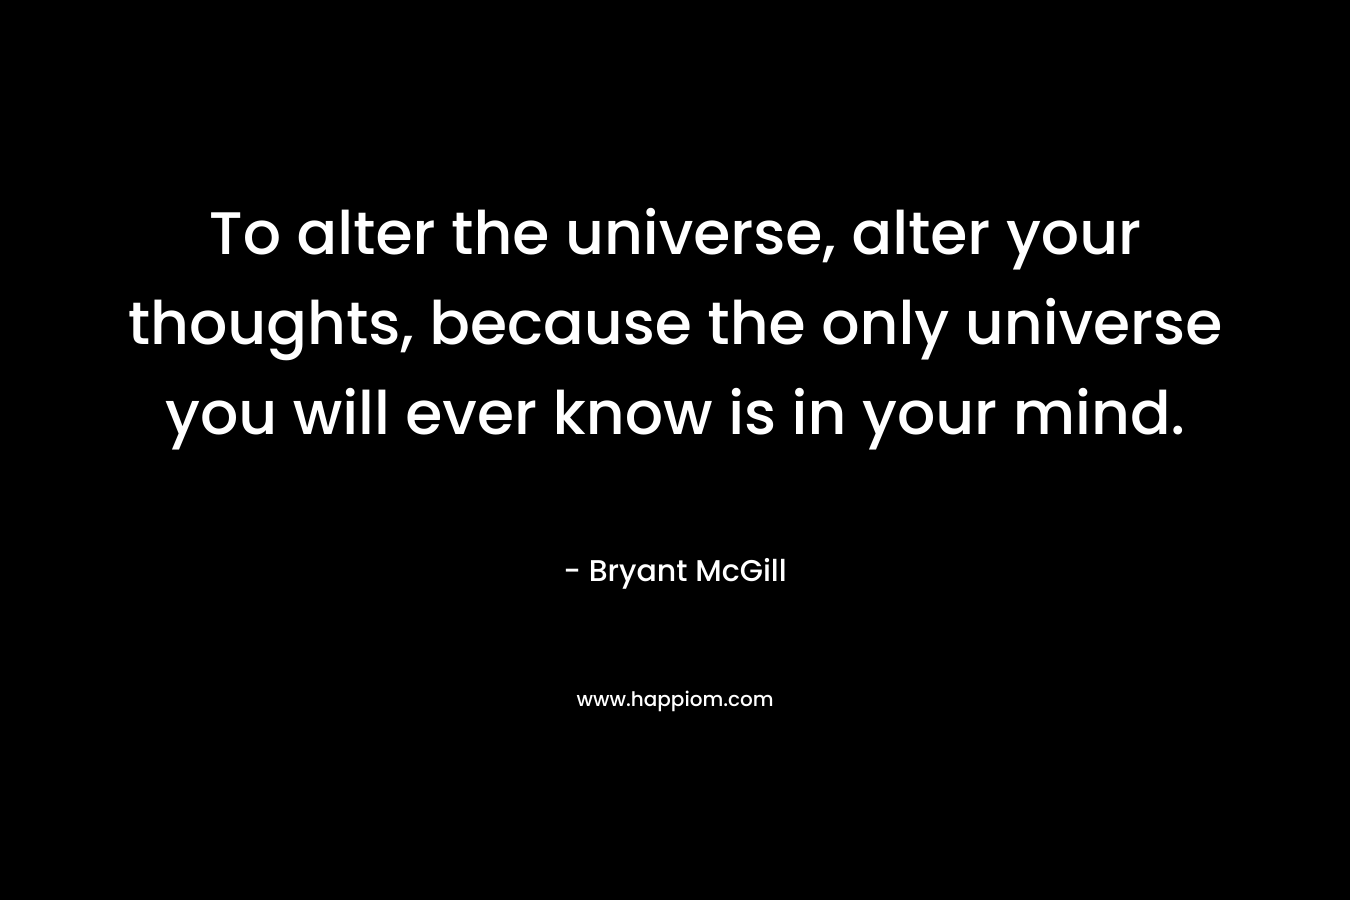 To alter the universe, alter your thoughts, because the only universe you will ever know is in your mind.